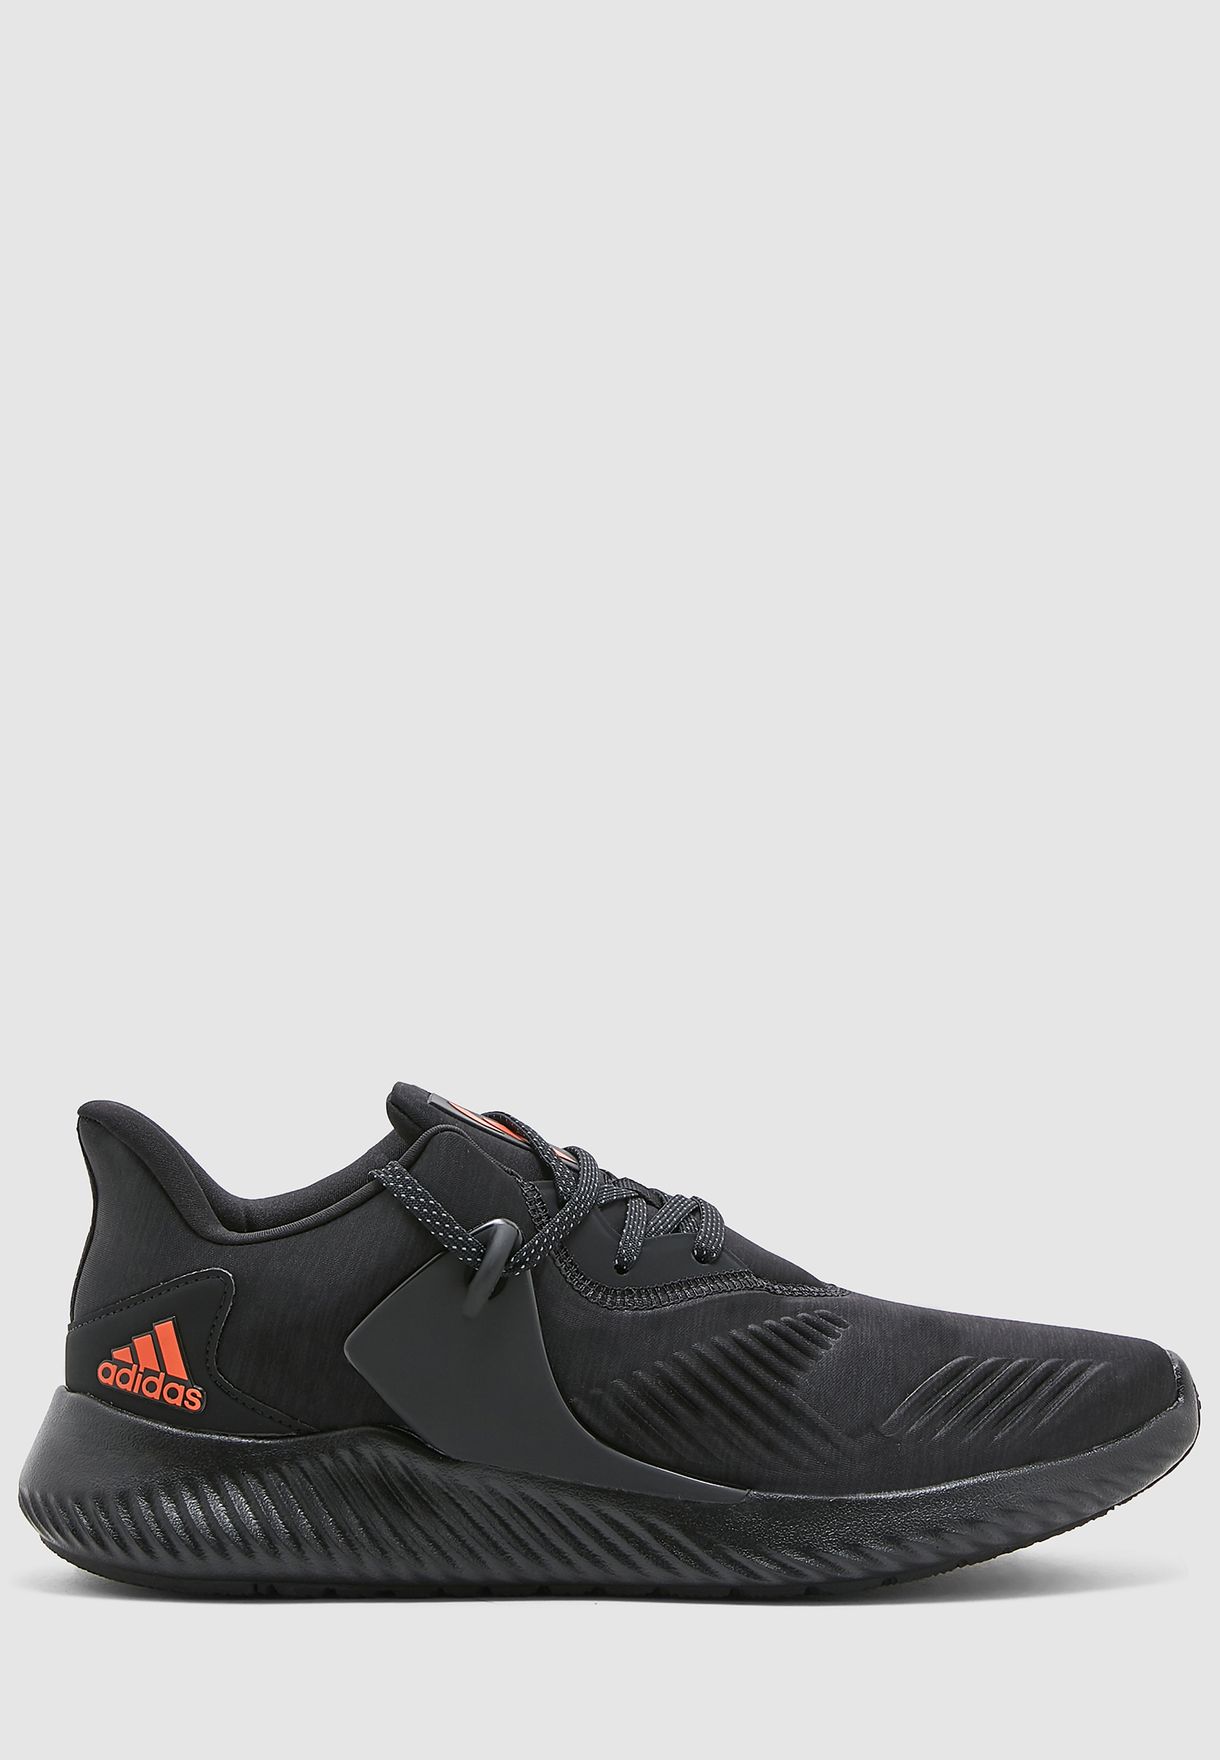 Adidas Alphabounce Rc 2 Black Cheap Sale, UP TO 66% OFF